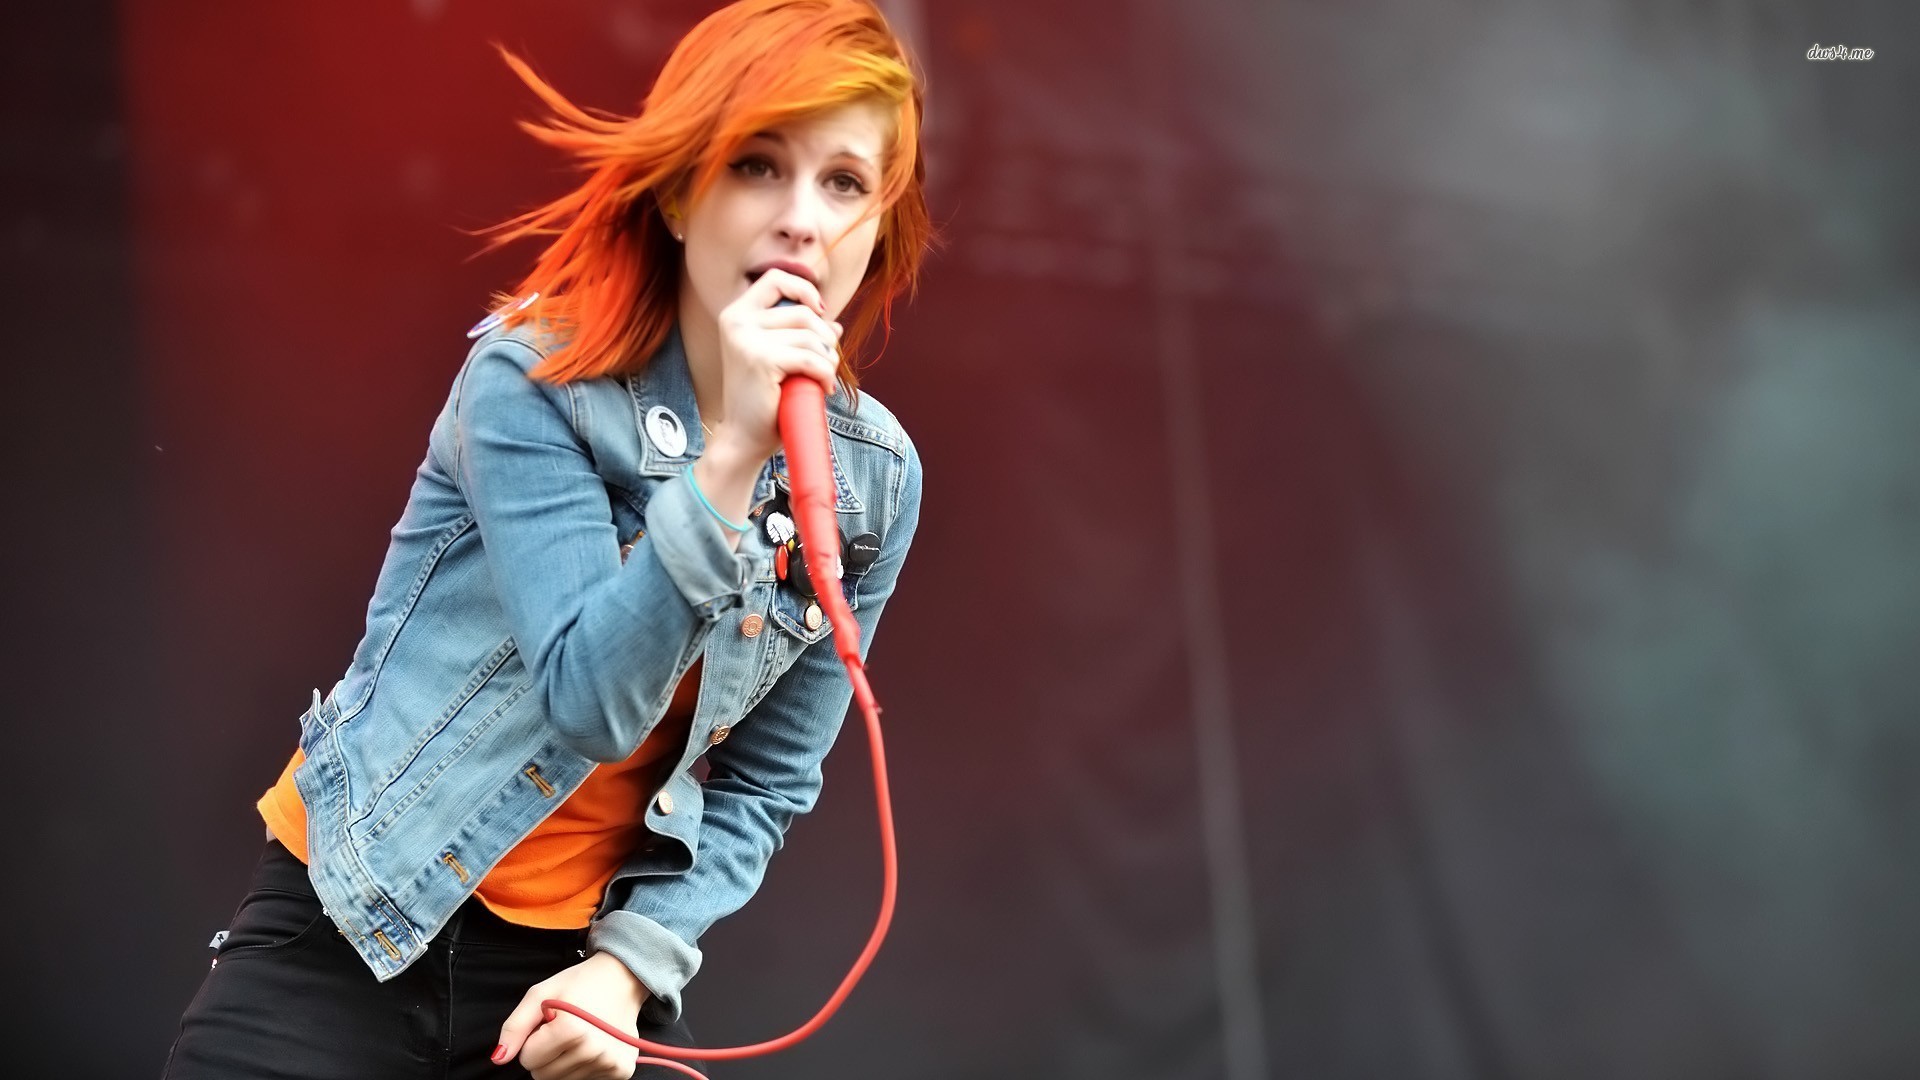 1920x1080 Hot HD Hayley Williams Wallpapers | Wallpapers 4k | Pinterest | Hayley  williams and Wallpaper